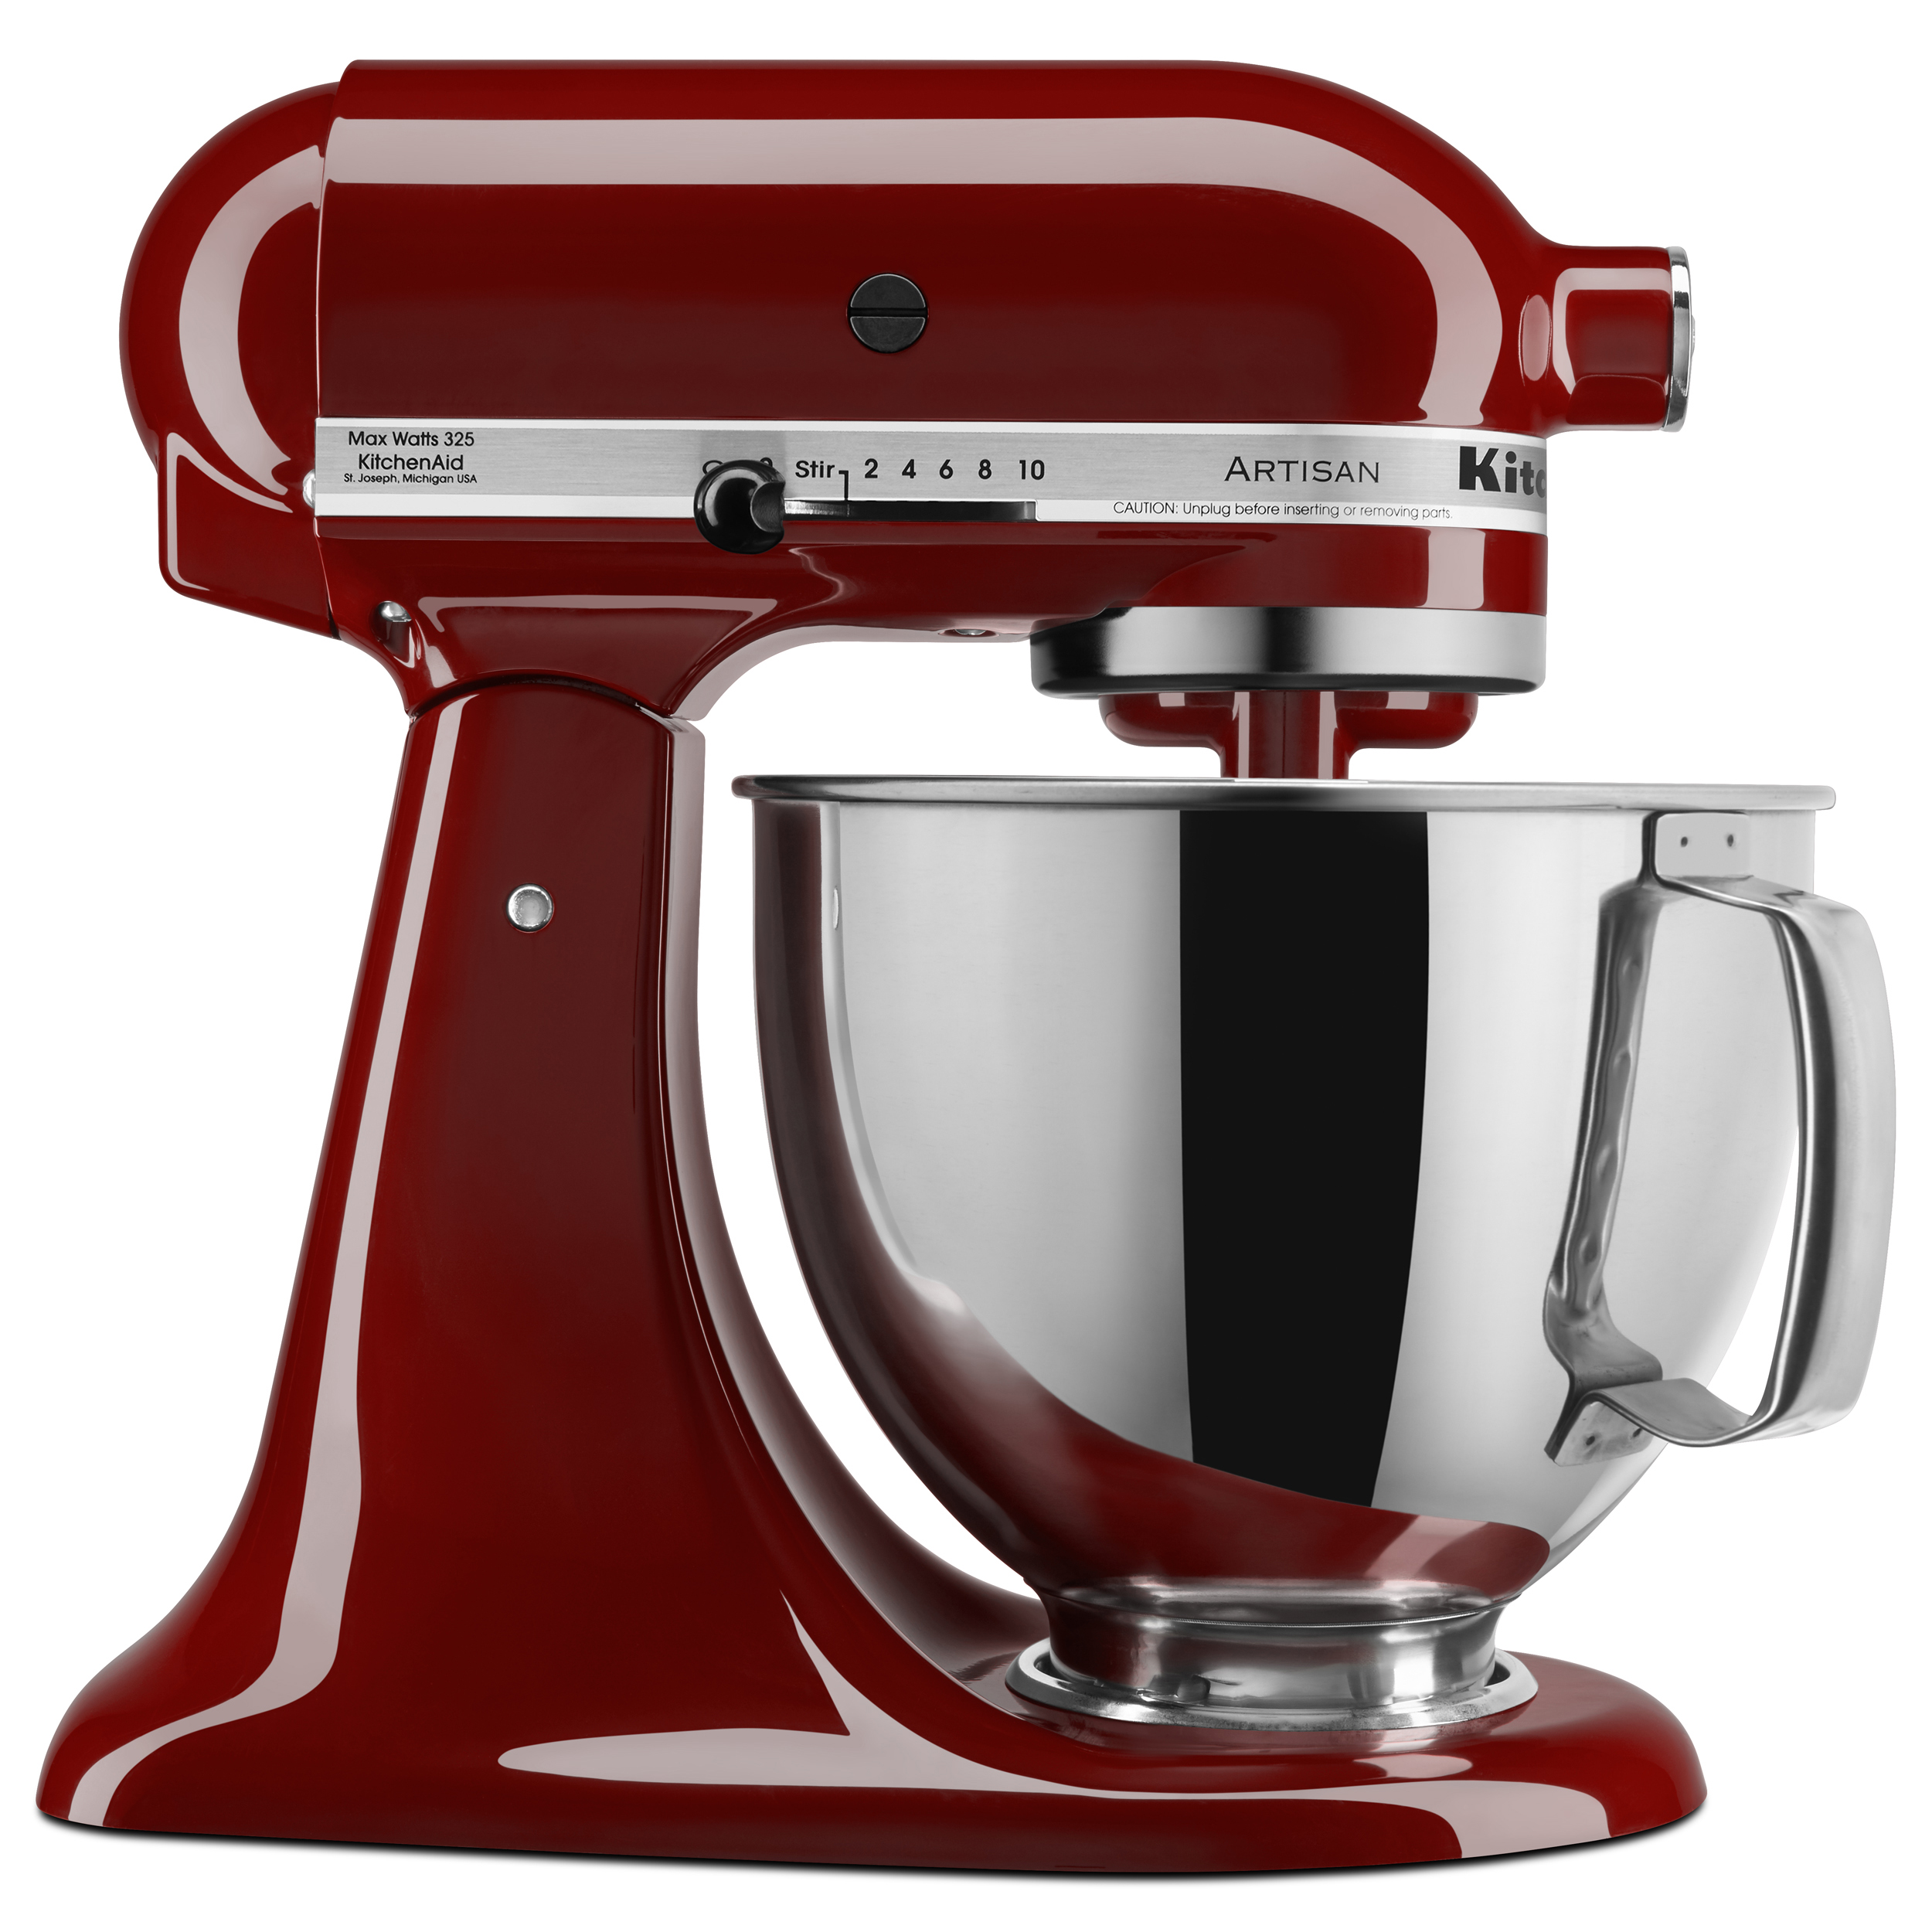 KitchenAid Artisan Series KSM150PSGC 5 qt. 325 Watts Stand Mixer with 10 Speed Solid-state Control  in Gloss Cinnamon